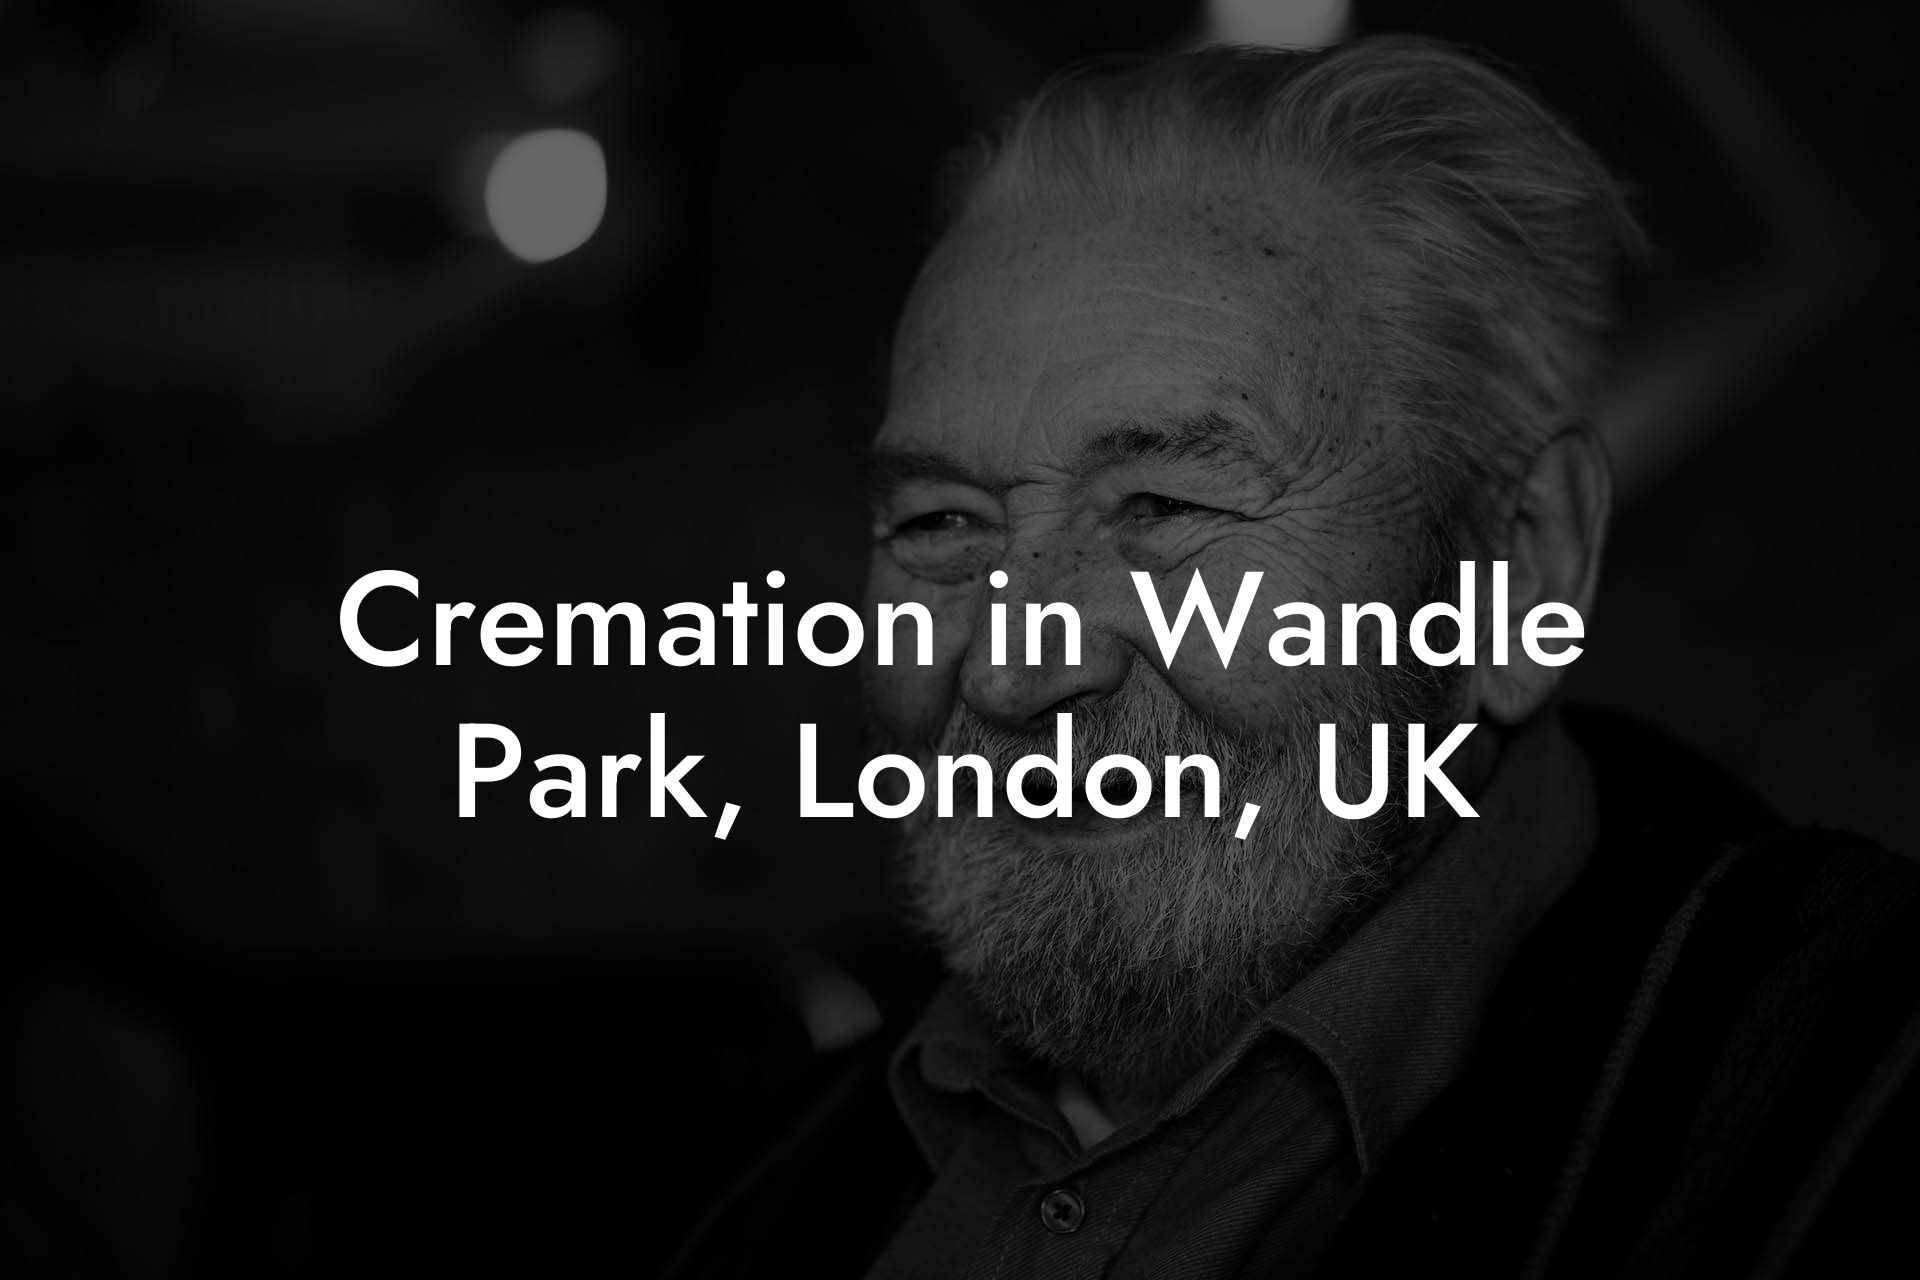 Cremation in Wandle Park, London, UK